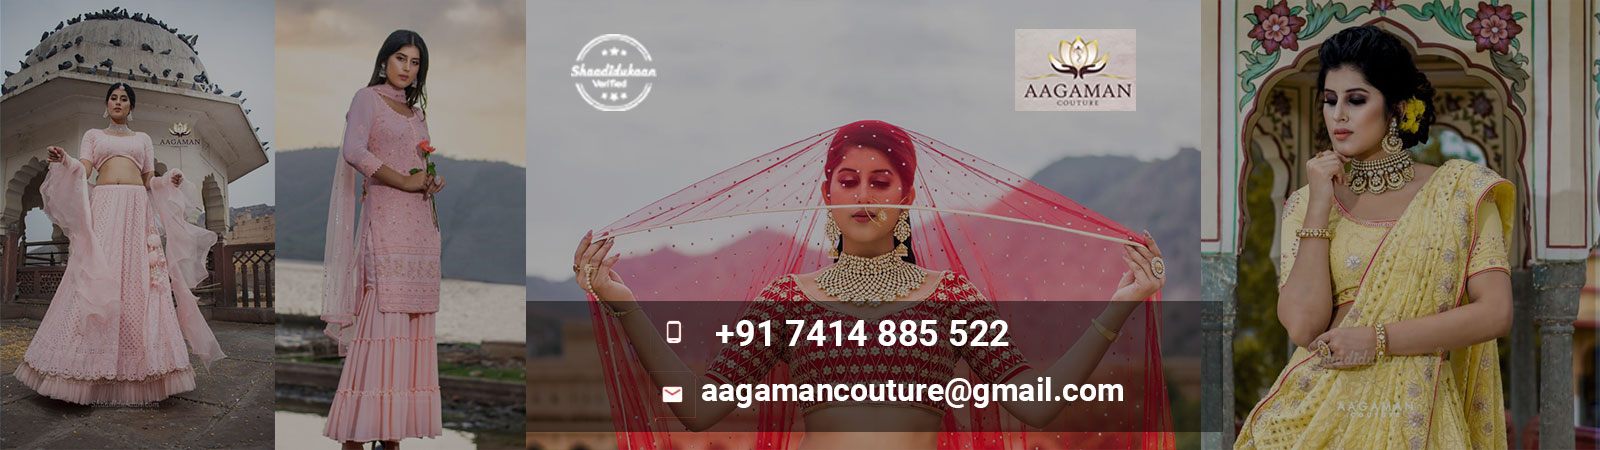 AAGAMAN COUTURE by Neha Asthana Meena